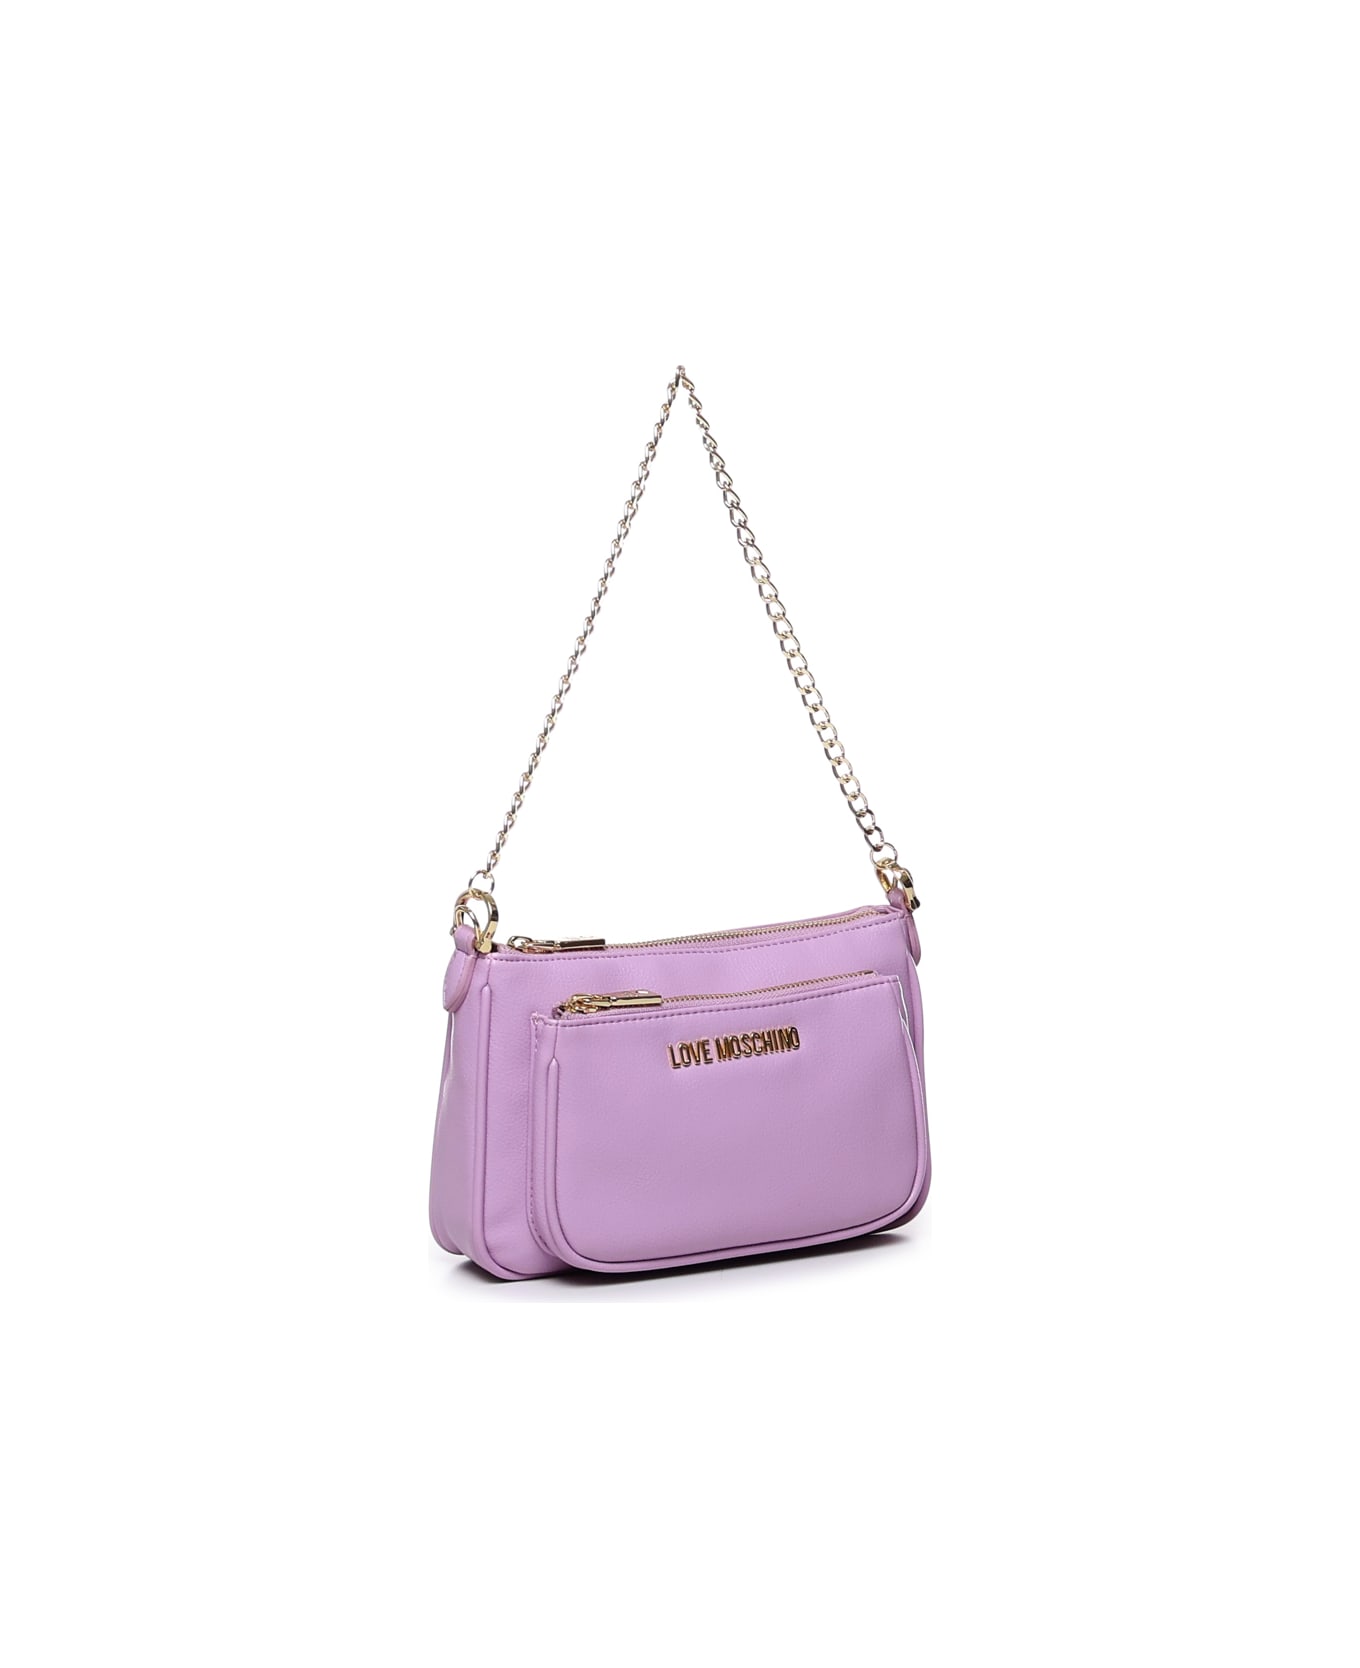 Love Moschino Pouch Charm Shoulder Bag - Lillac ショルダーバッグ